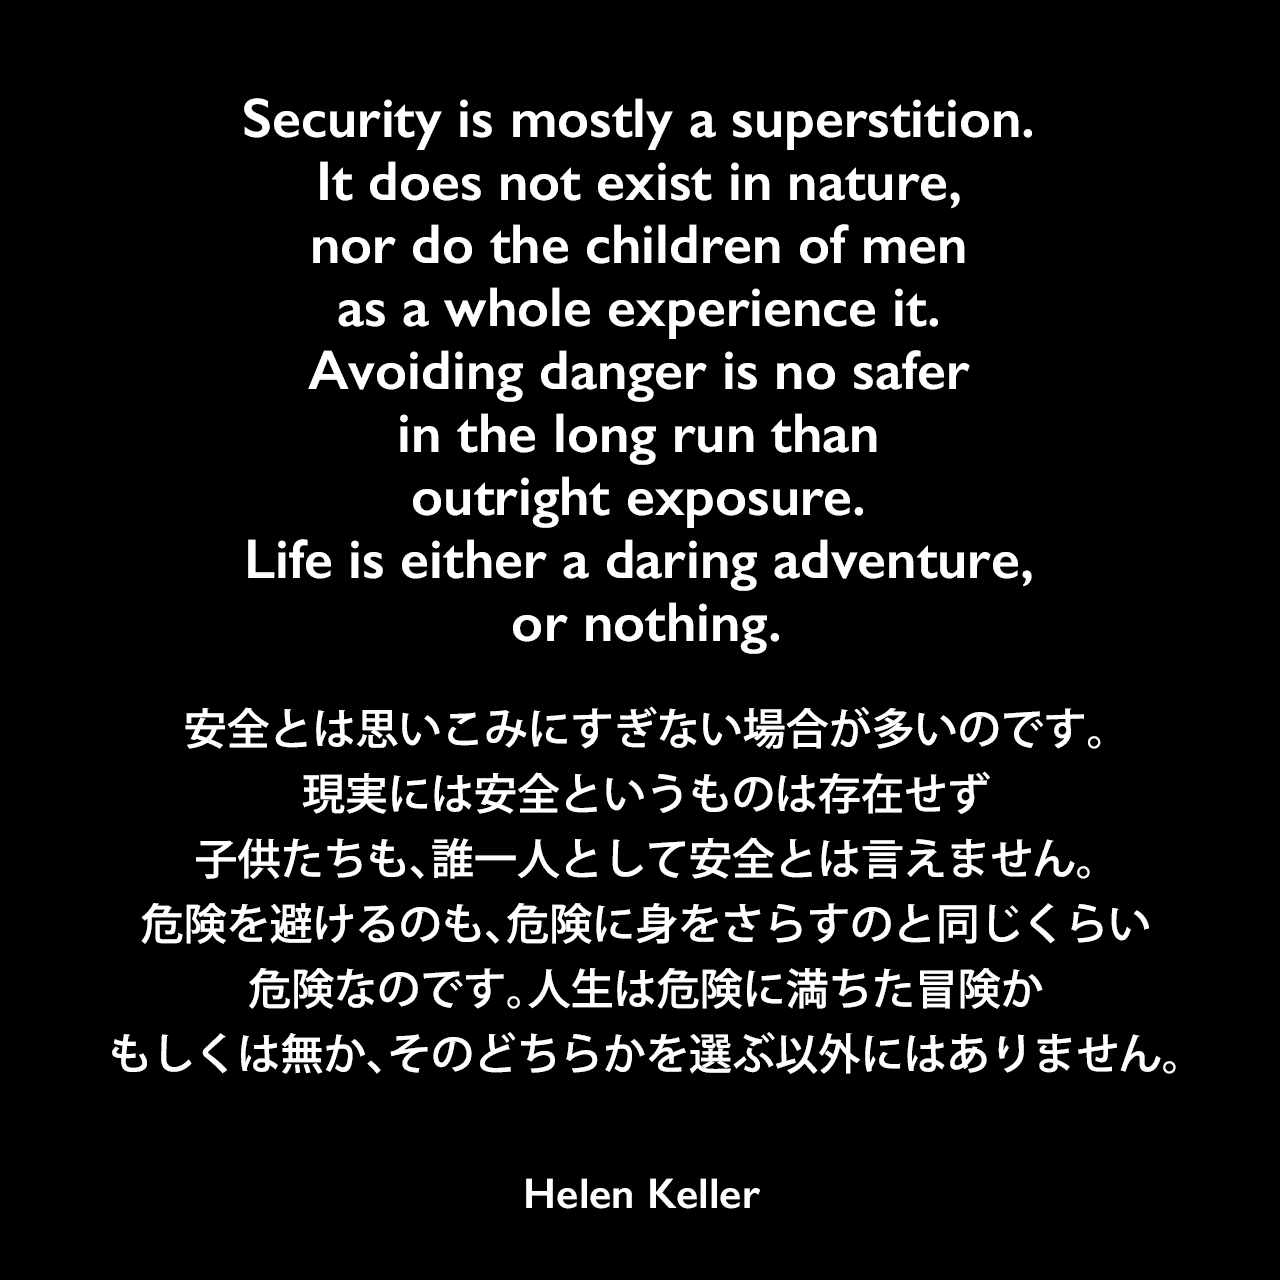 Security is mostly a superstition. It does not exist in nature, nor do the children of men as a whole experience it. Avoiding danger is no safer in the long run than outright exposure. Life is either a daring adventure, or nothing.安全とは思いこみにすぎない場合が多いのです。現実には安全というものは存在せず、子供たちも、誰一人として安全とは言えません。危険を避けるのも、危険に身をさらすのと同じくらい危険なのです。人生は危険に満ちた冒険か、もしくは無か、そのどちらかを選ぶ以外にはありません。- ヘレン・ケラーの本「The Open Door」よりHelen Keller